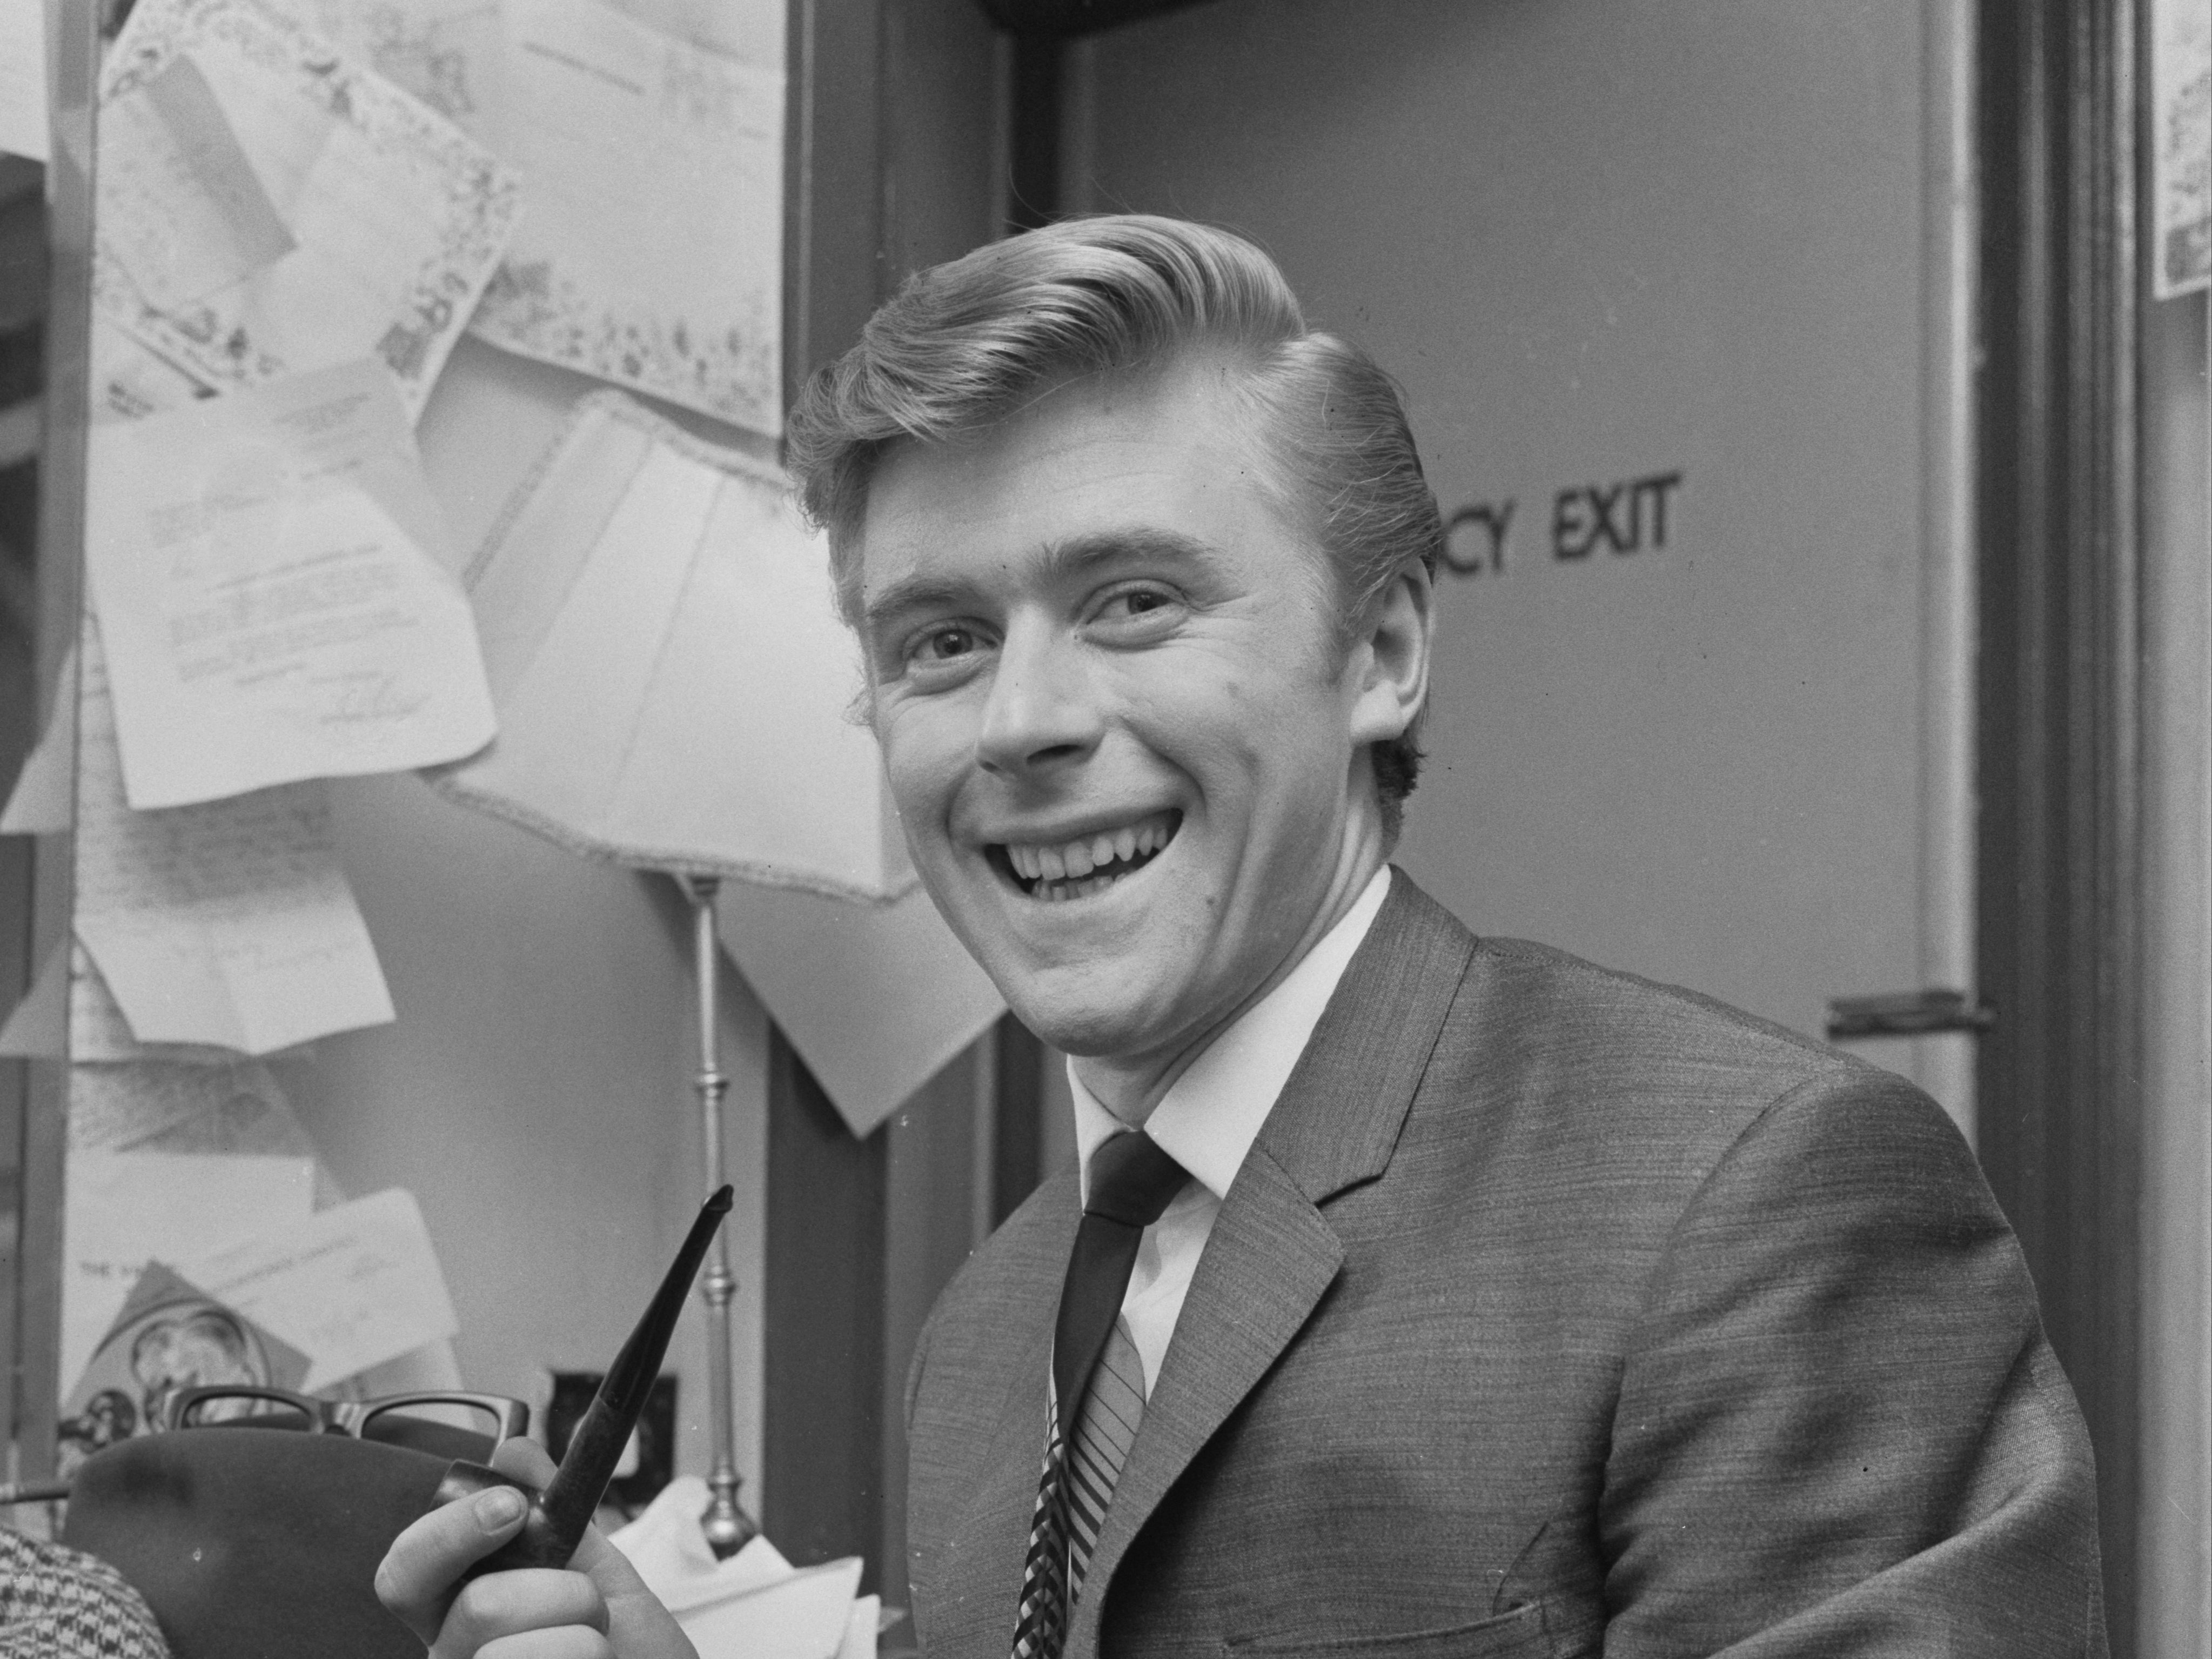 Mike Yarwood pictured in 1965